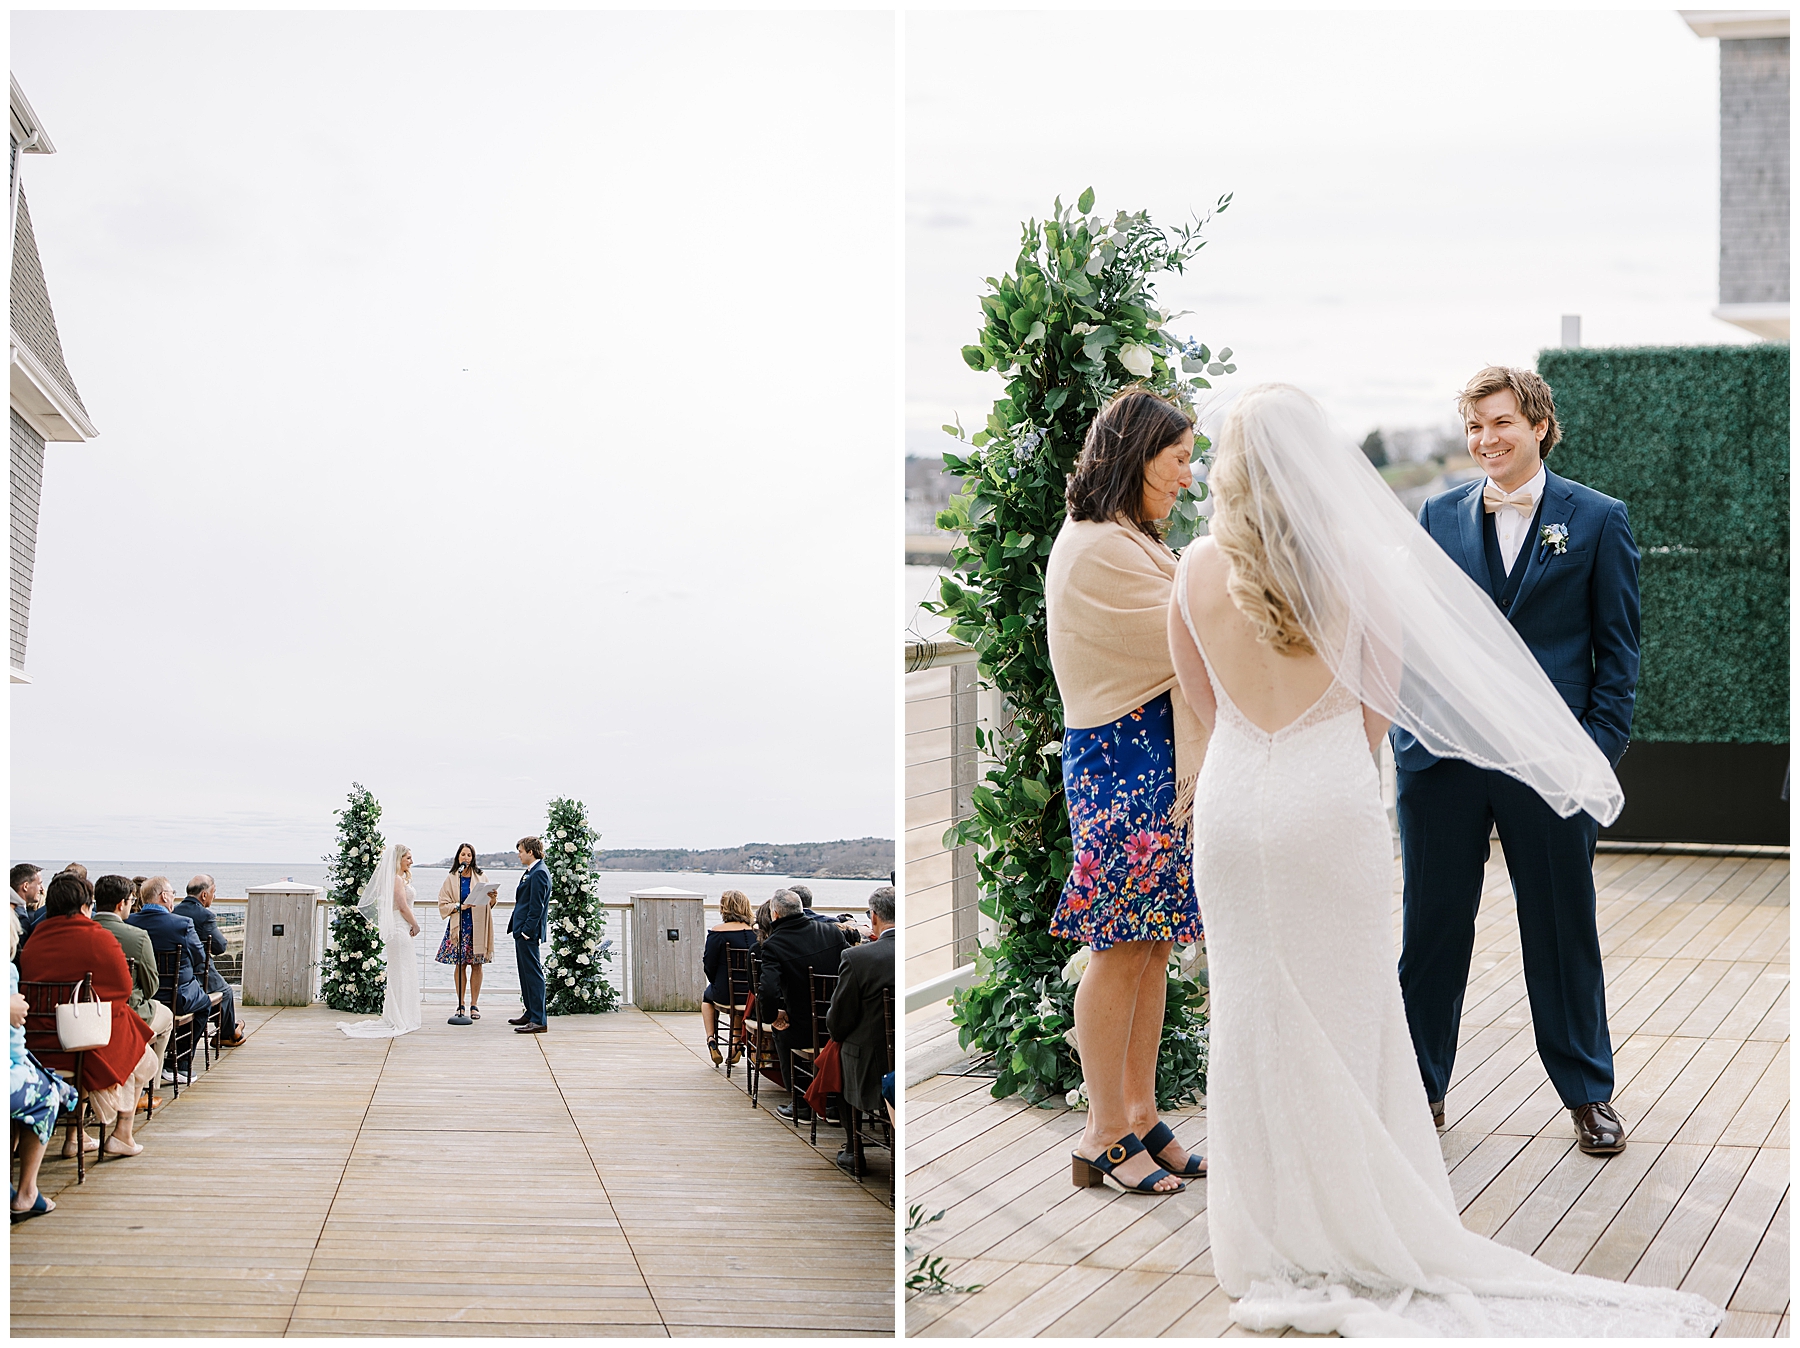 Oceanside Wedding ceremony at Beauport Hotel in Gloucester, MA